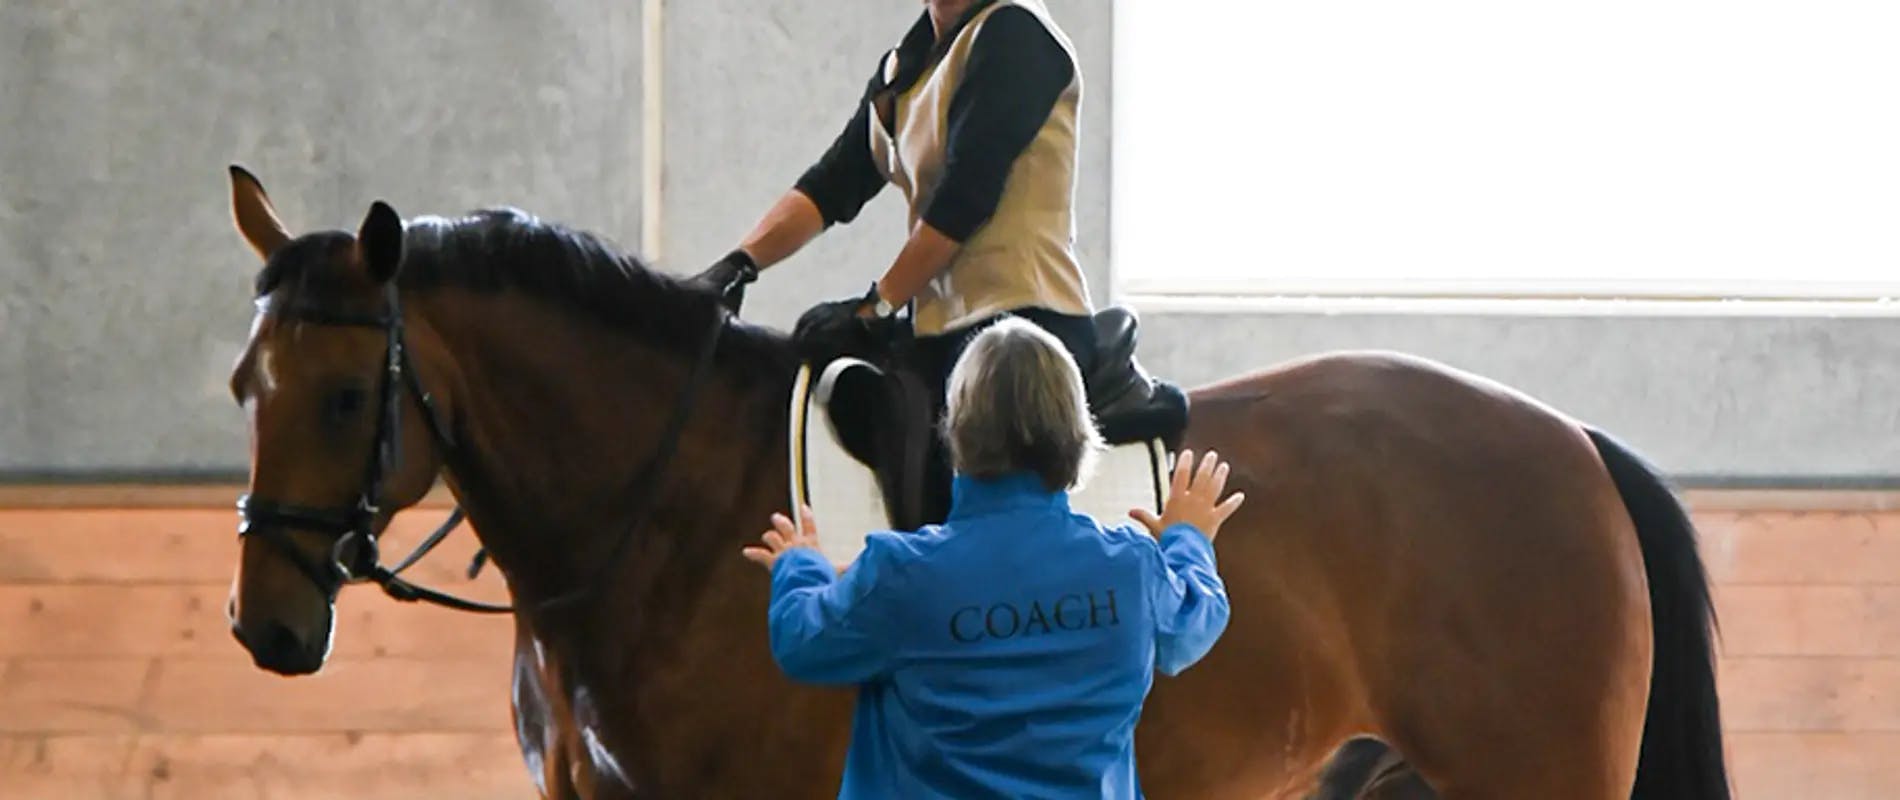 Instructor educating rider on a horse